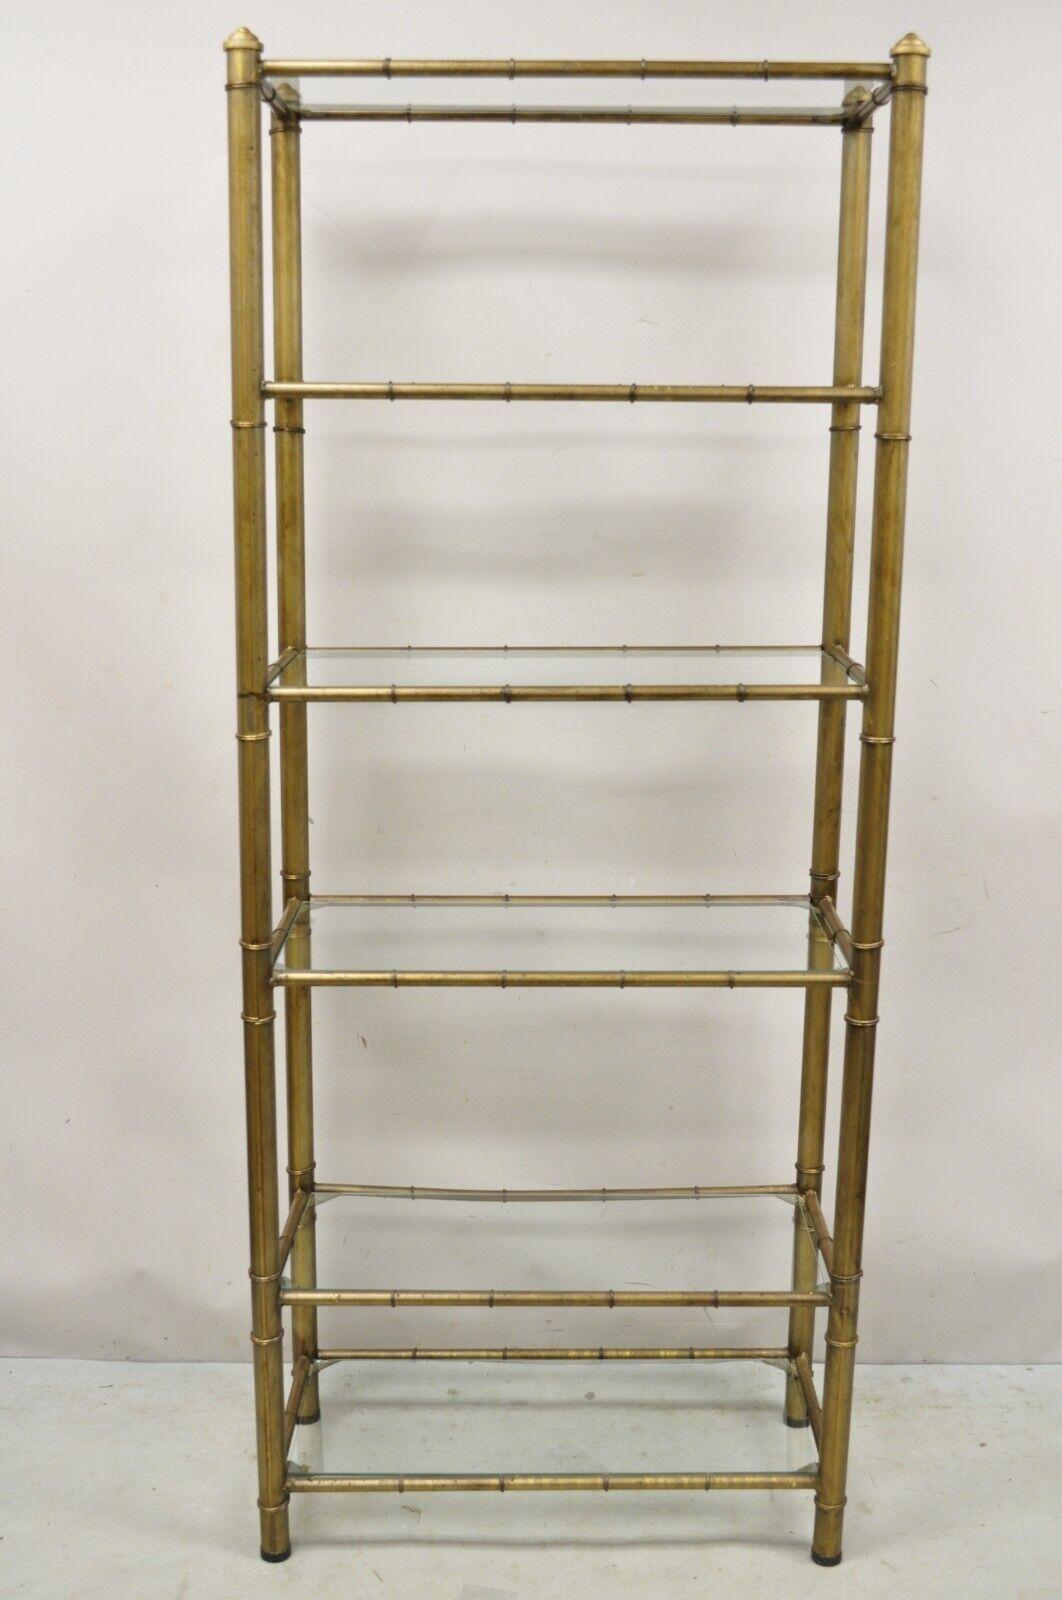 Vintage Hollywood Regency Faux Bamboo Steel Metal Gold 6 Tier Etagere Shelf Bookcase. Item features steel metal faux bamboo design frame, 6 glass shelves, dark gold distress painted finish, very nice vintage item, great style and form. Circa Mid